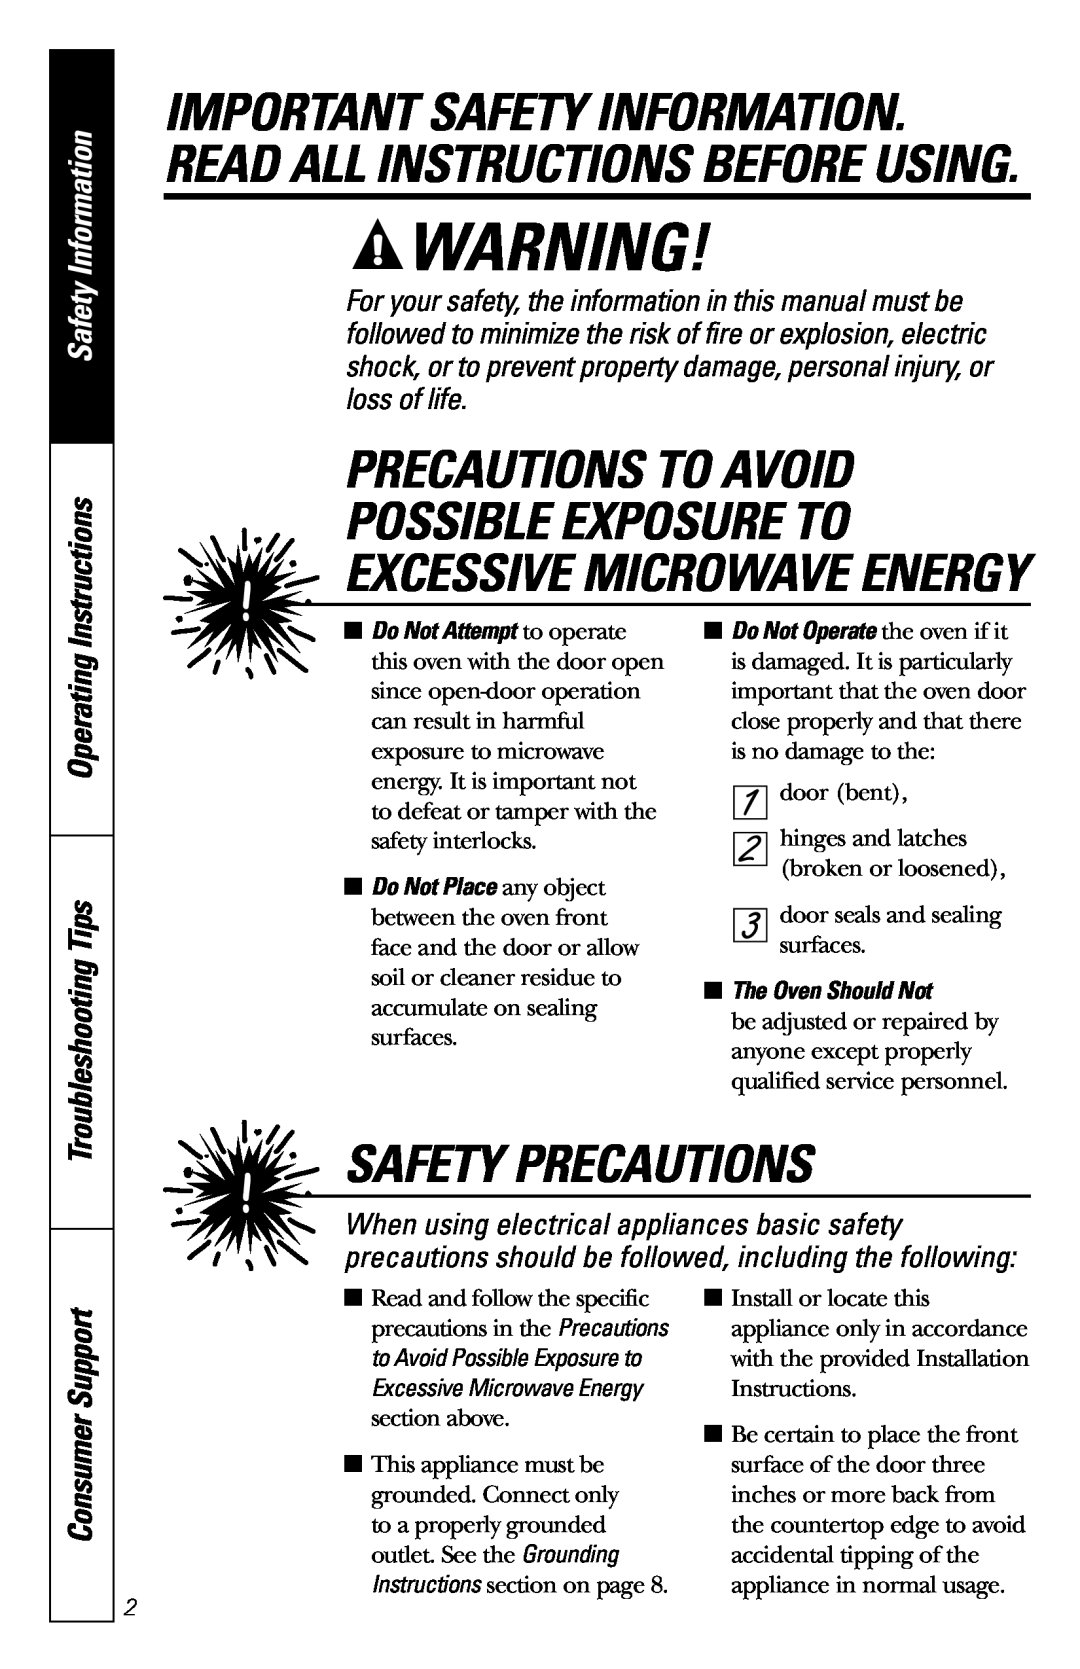 GE JES1231 Precautions To Avoid, Safety Precautions, Important Safety Information. Read All Instructions Before Using 